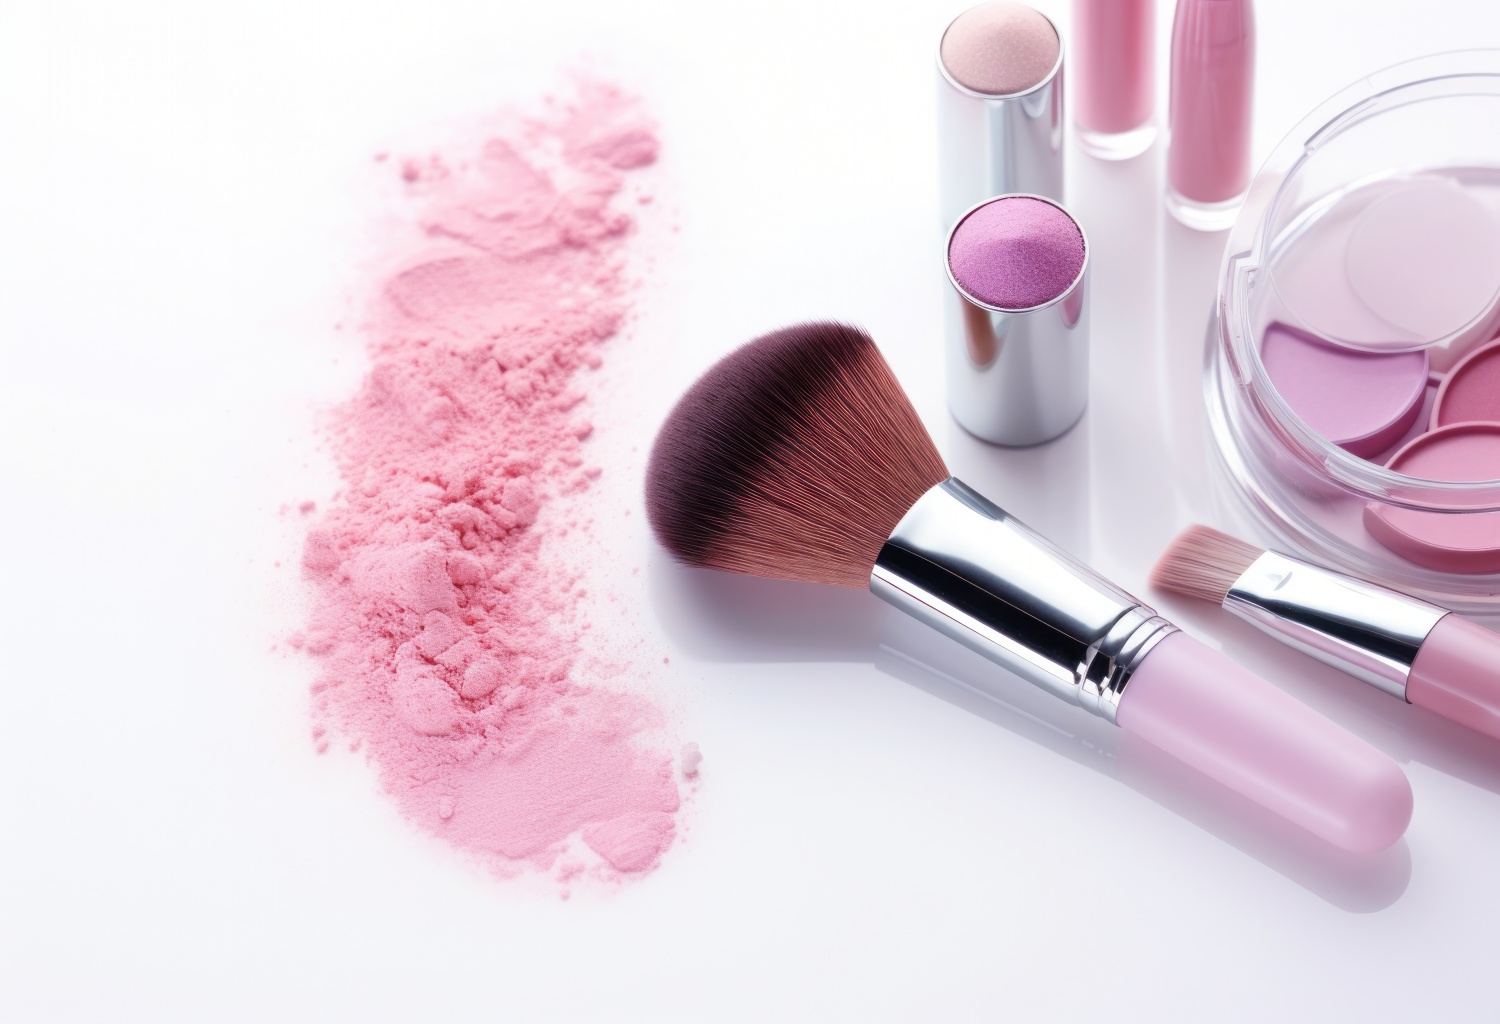 Liquid Blush Vs Powder Blush: Which Is Better for Your Makeup Look?